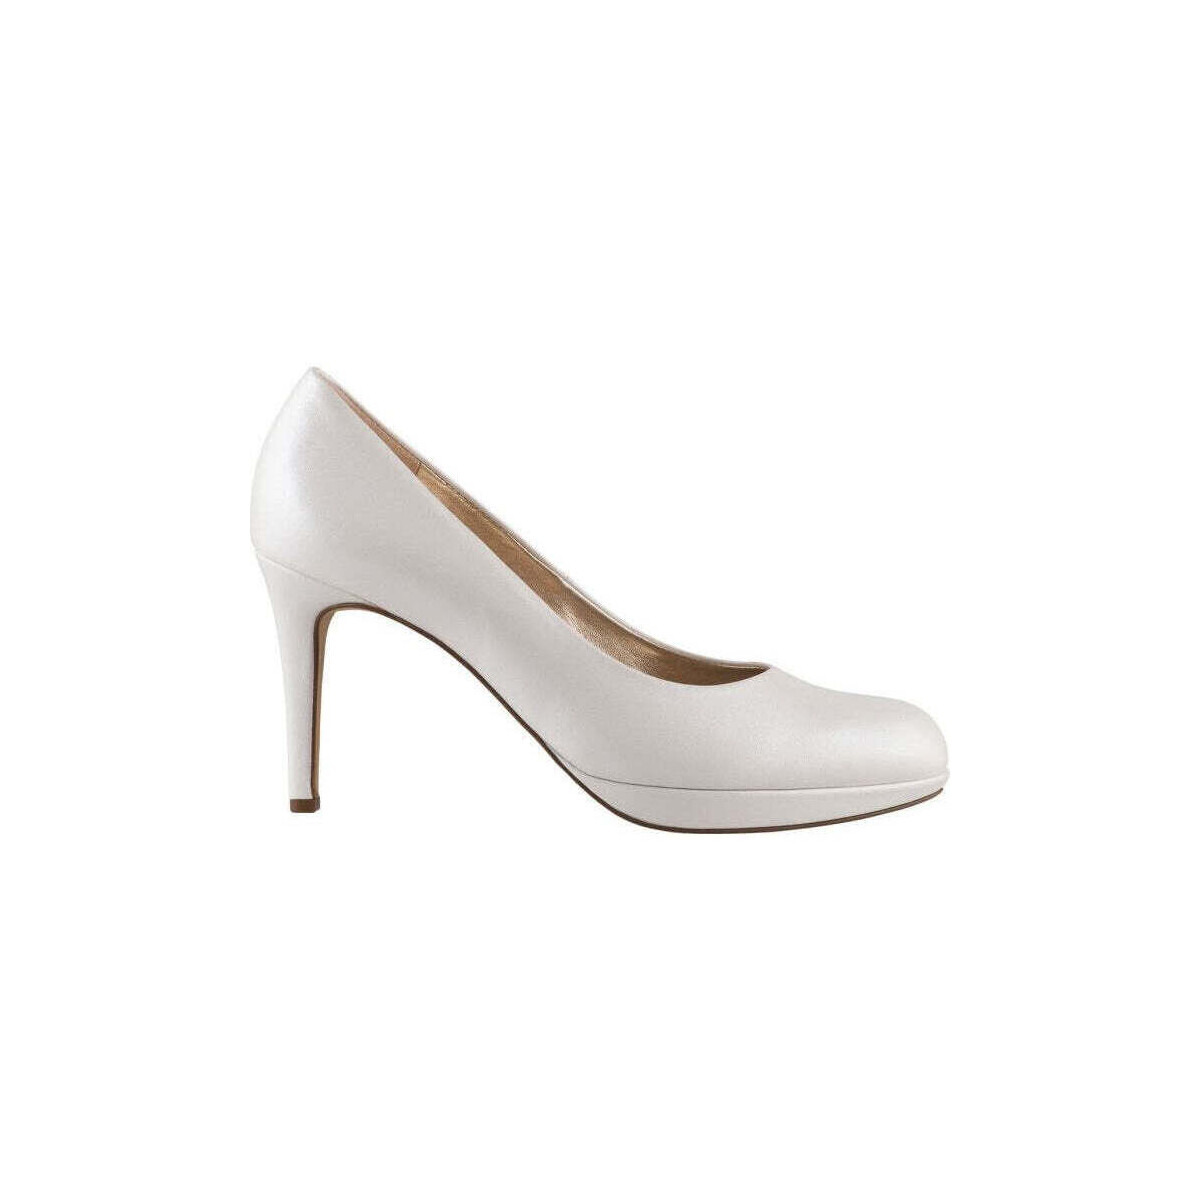 Högl - Woman White Pumps by Spartoo GOOFASH